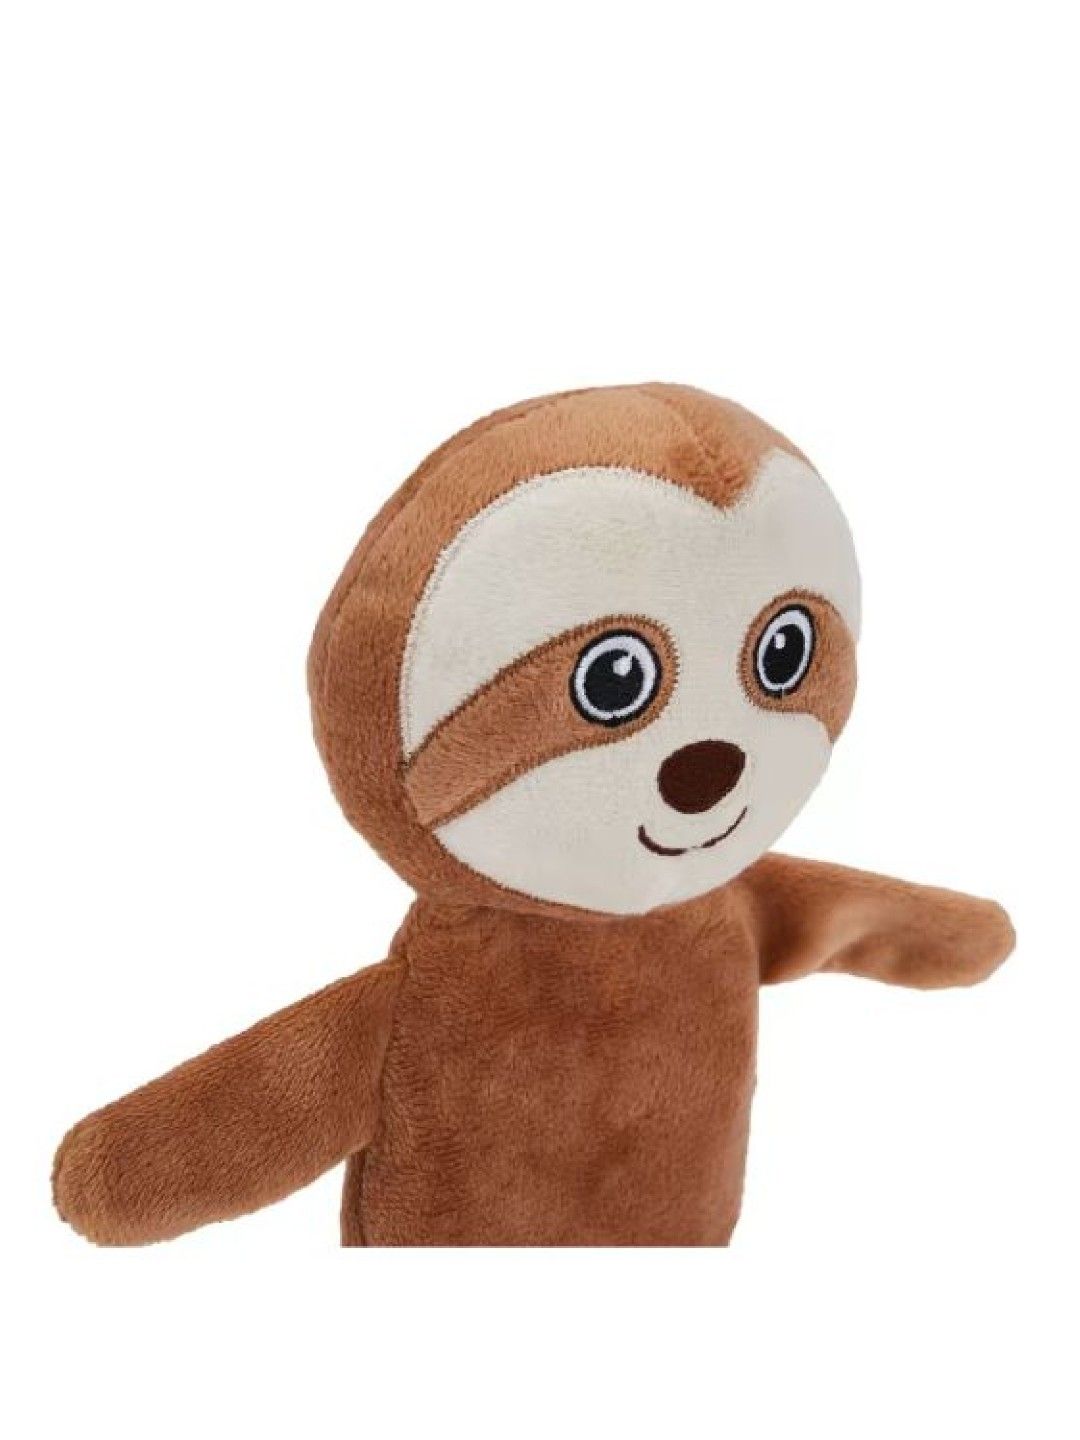 Anko Pet Toy Puppy Crinkle Sloth (Brown- Image 2)